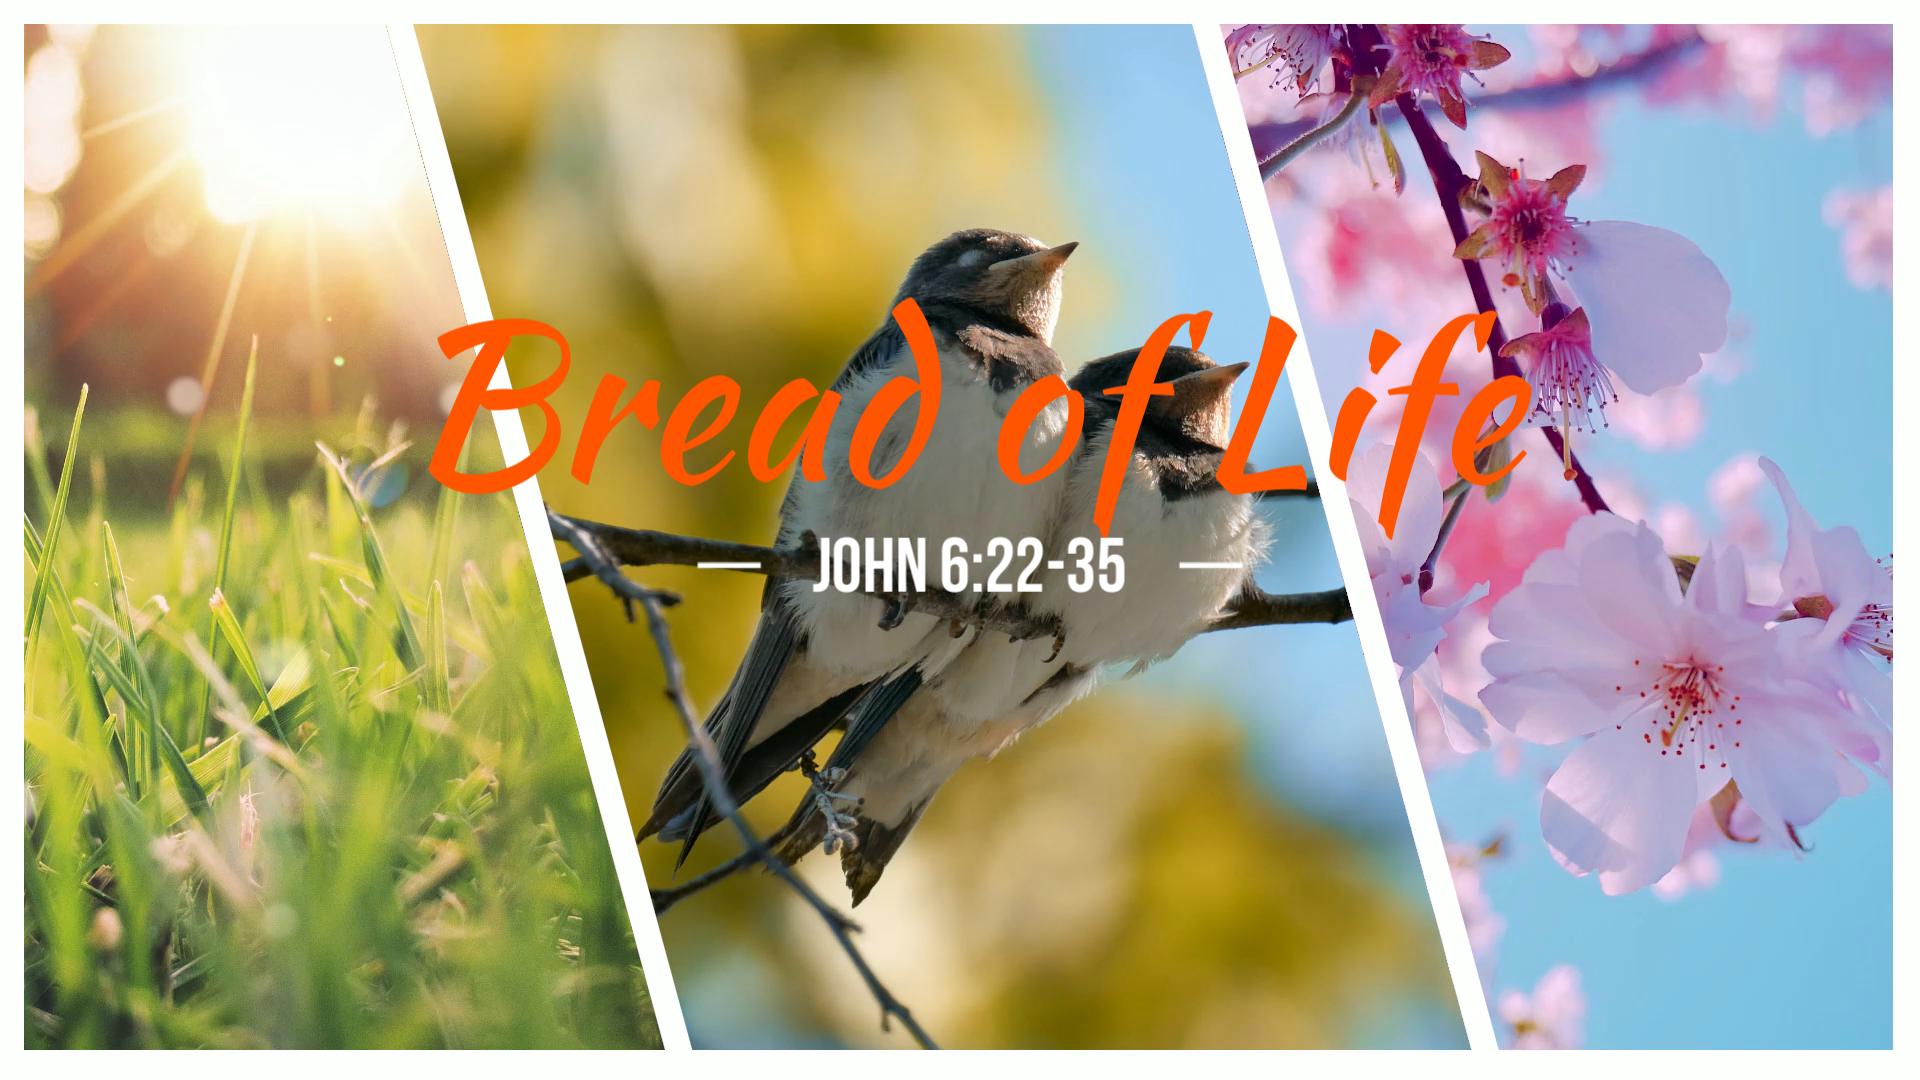 Bread of Life Banner